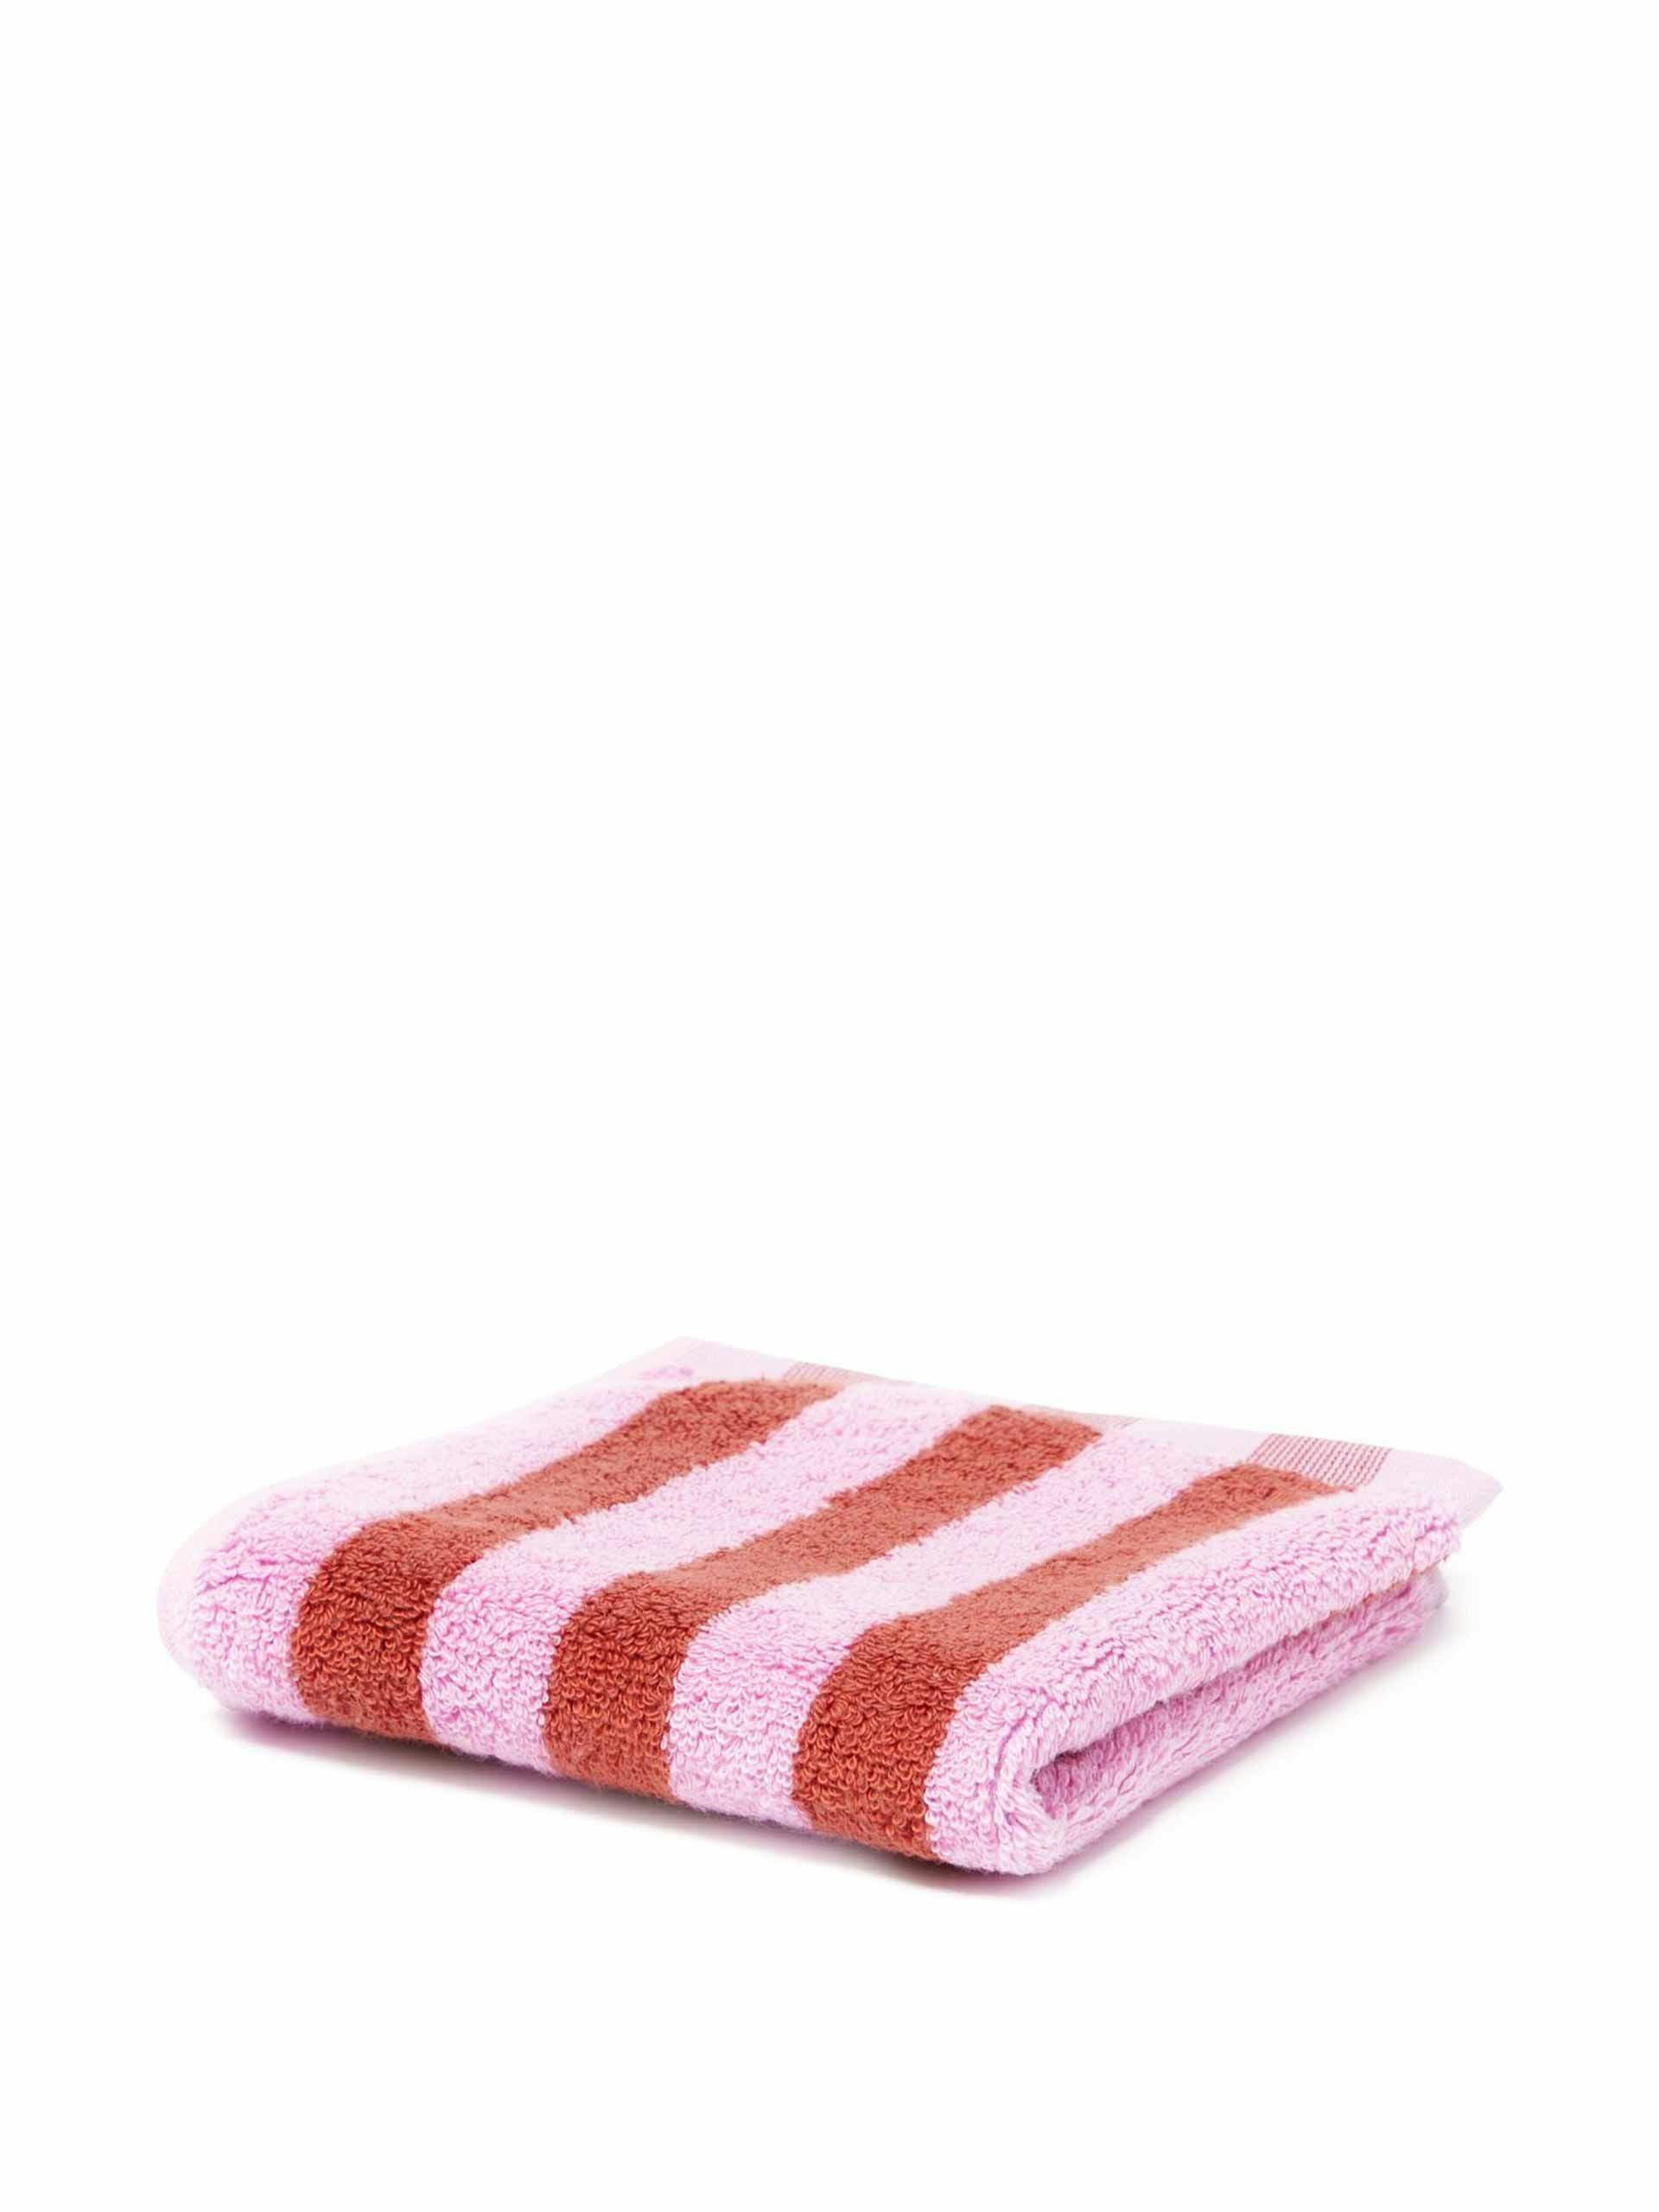 Pink and red striped face cloth